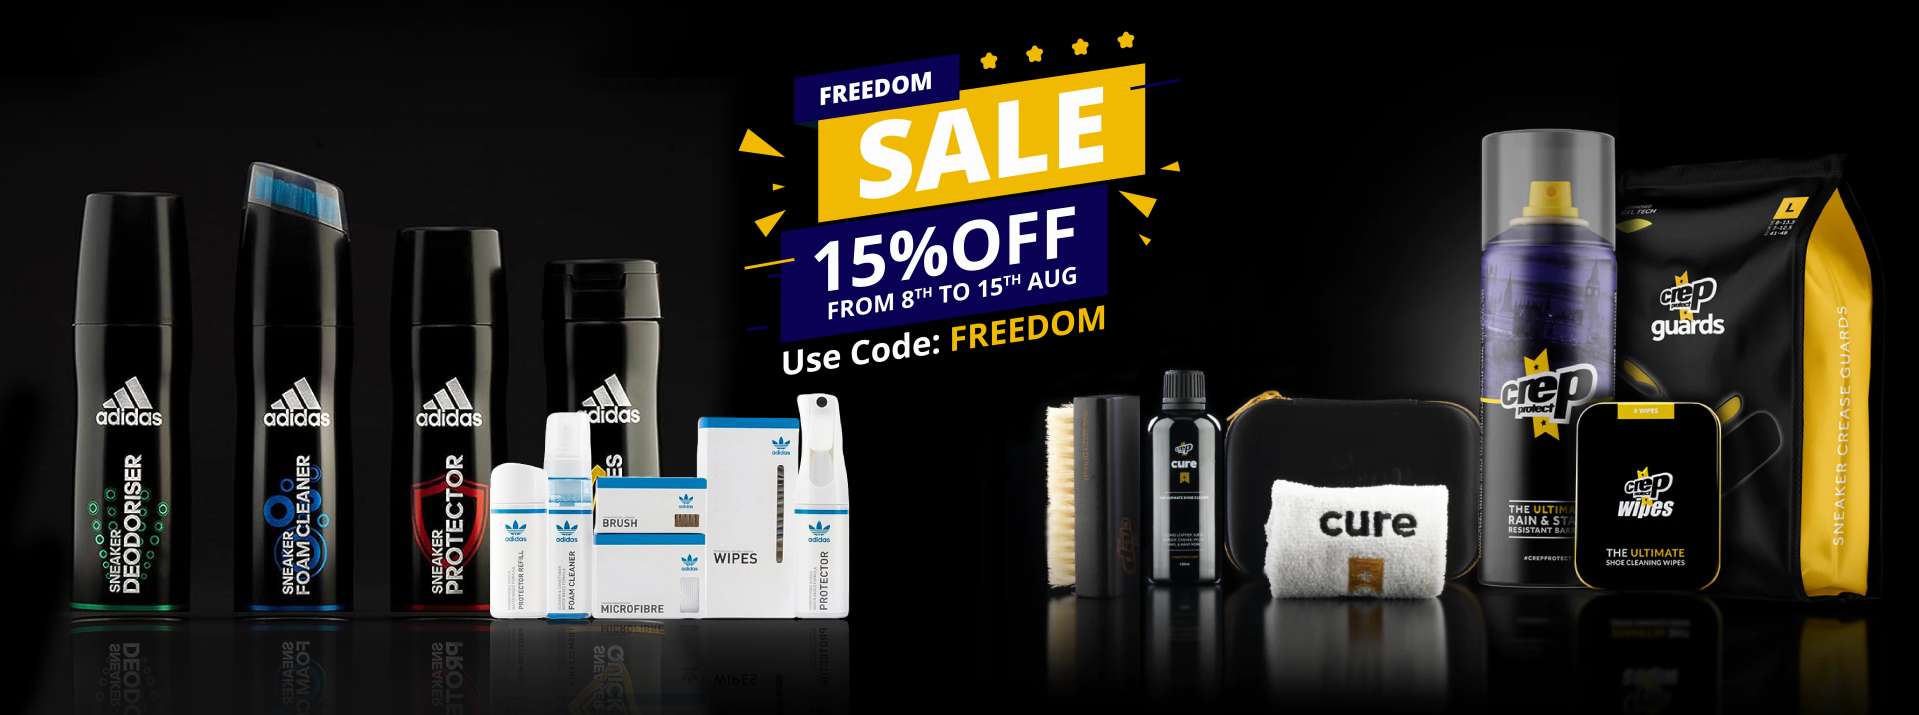 Crep Protect India Freedom Sale Banner